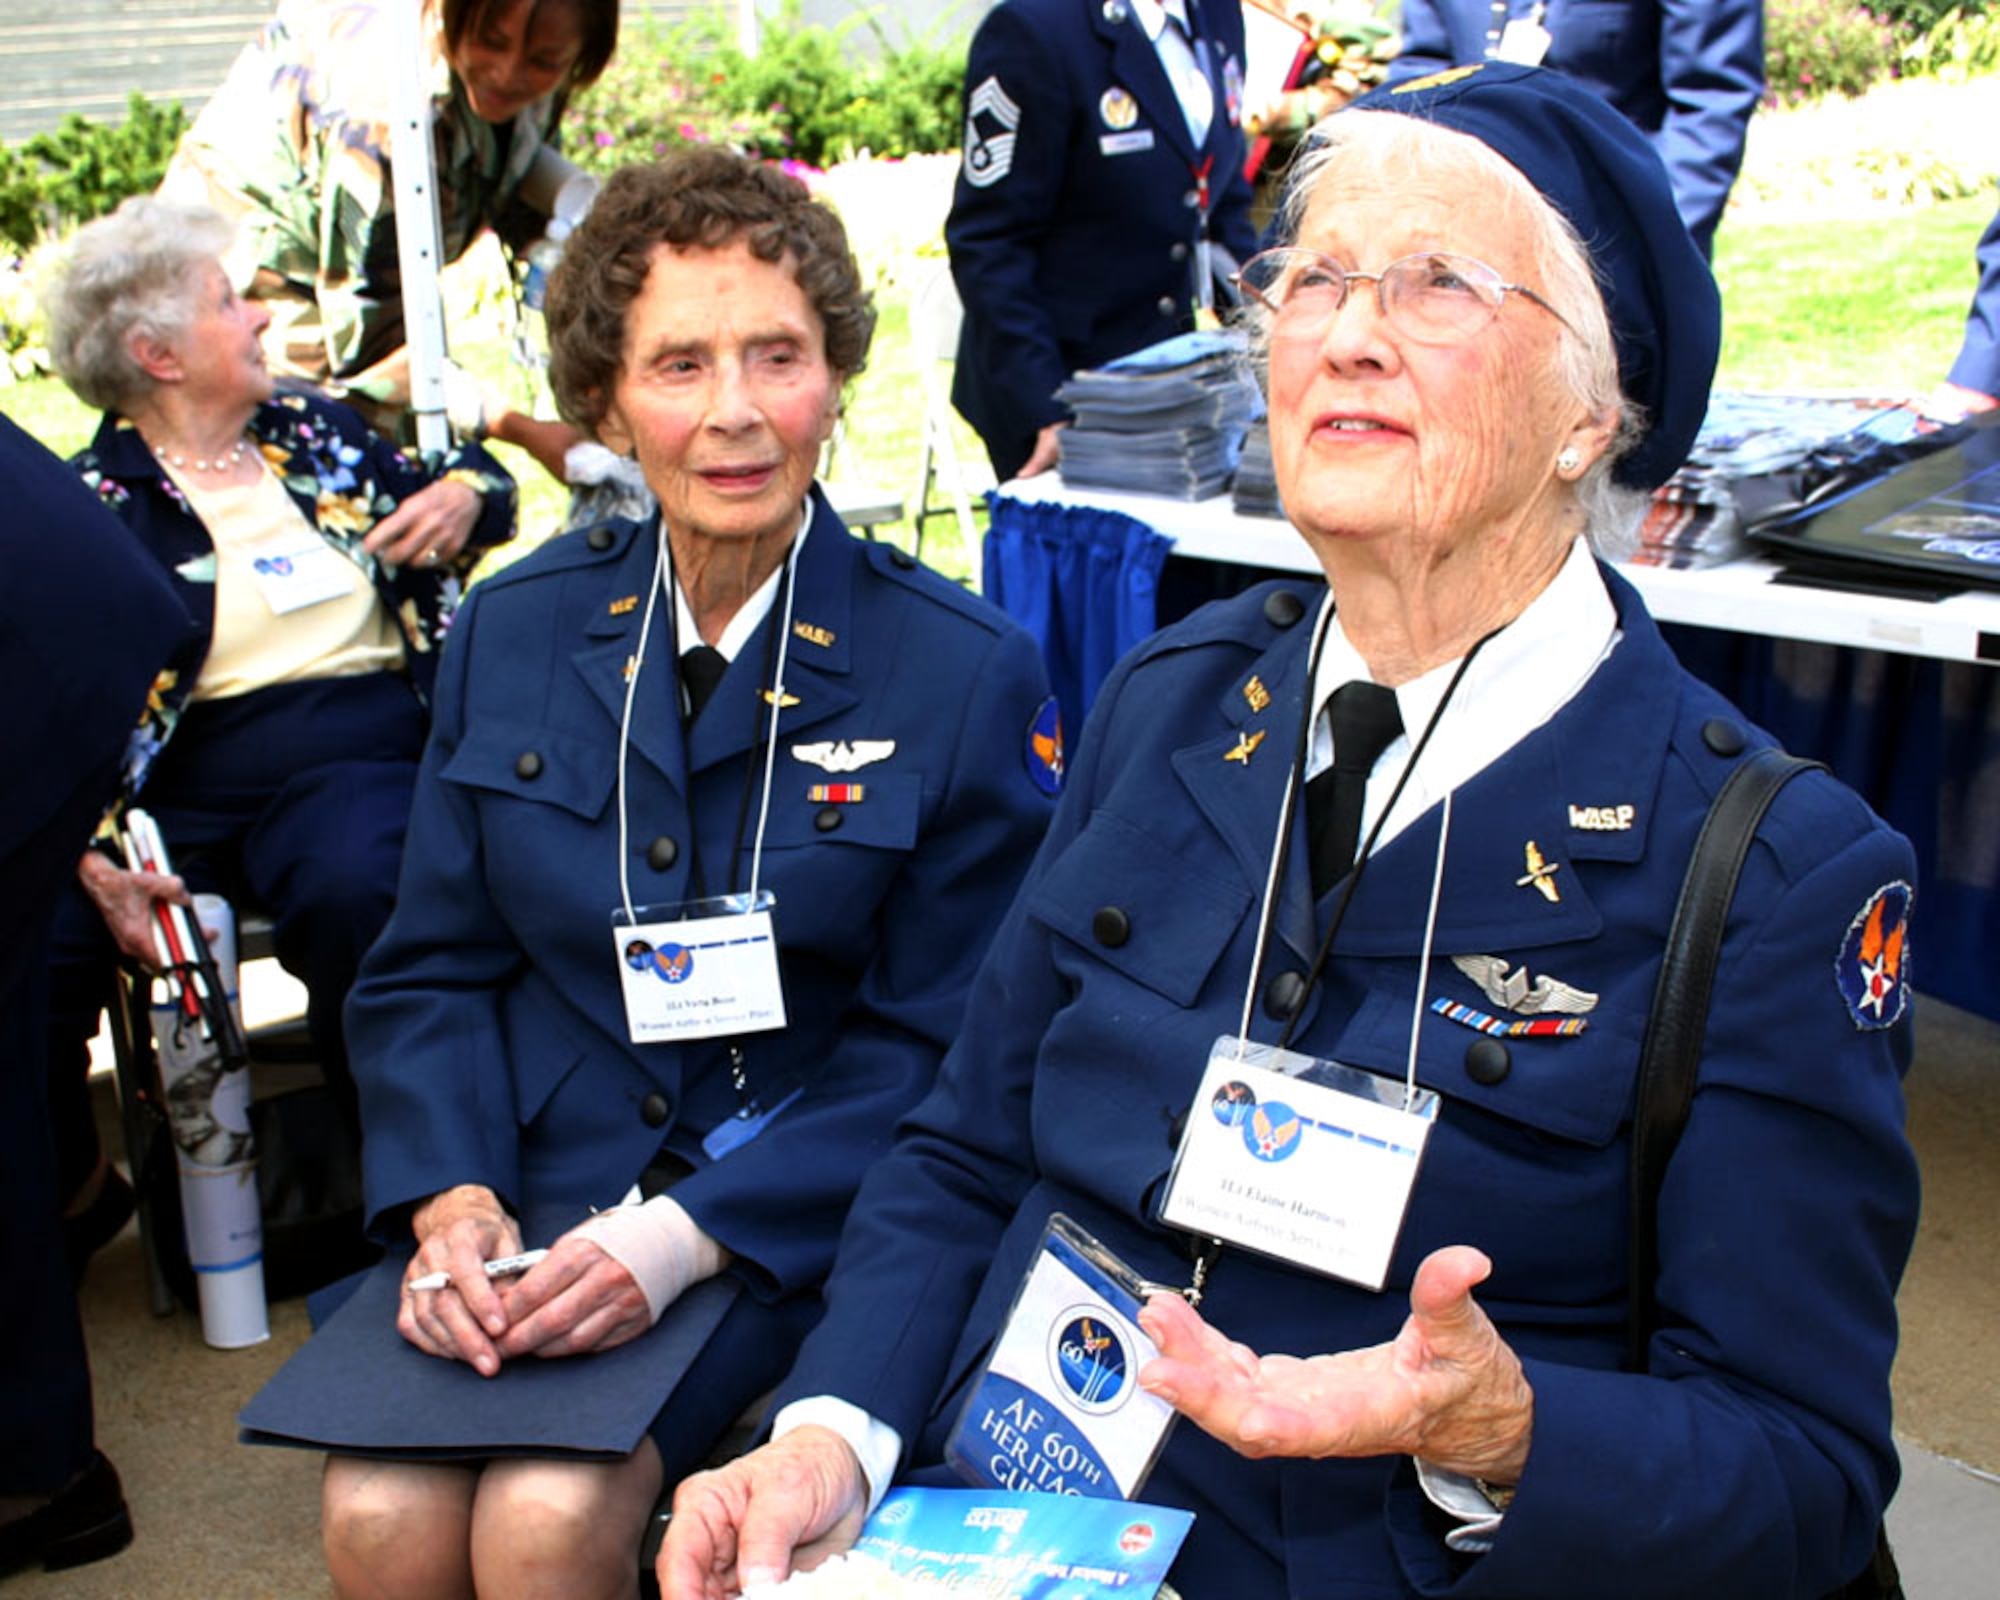 Women Airforce Service Pilot 1st Lieutenants Velta Benn and Elaine Harmon speak to guests at the Air Force 60th anniversary celebration in the Pentagon courtyard Sept. 18.  WASPs performed flying duties during World War II like ferrying aircraft from factories to military bases and towing targets for gunnery training.  (U.S. Air Force photo/Senior Master Sgt. Ray Sarracino)